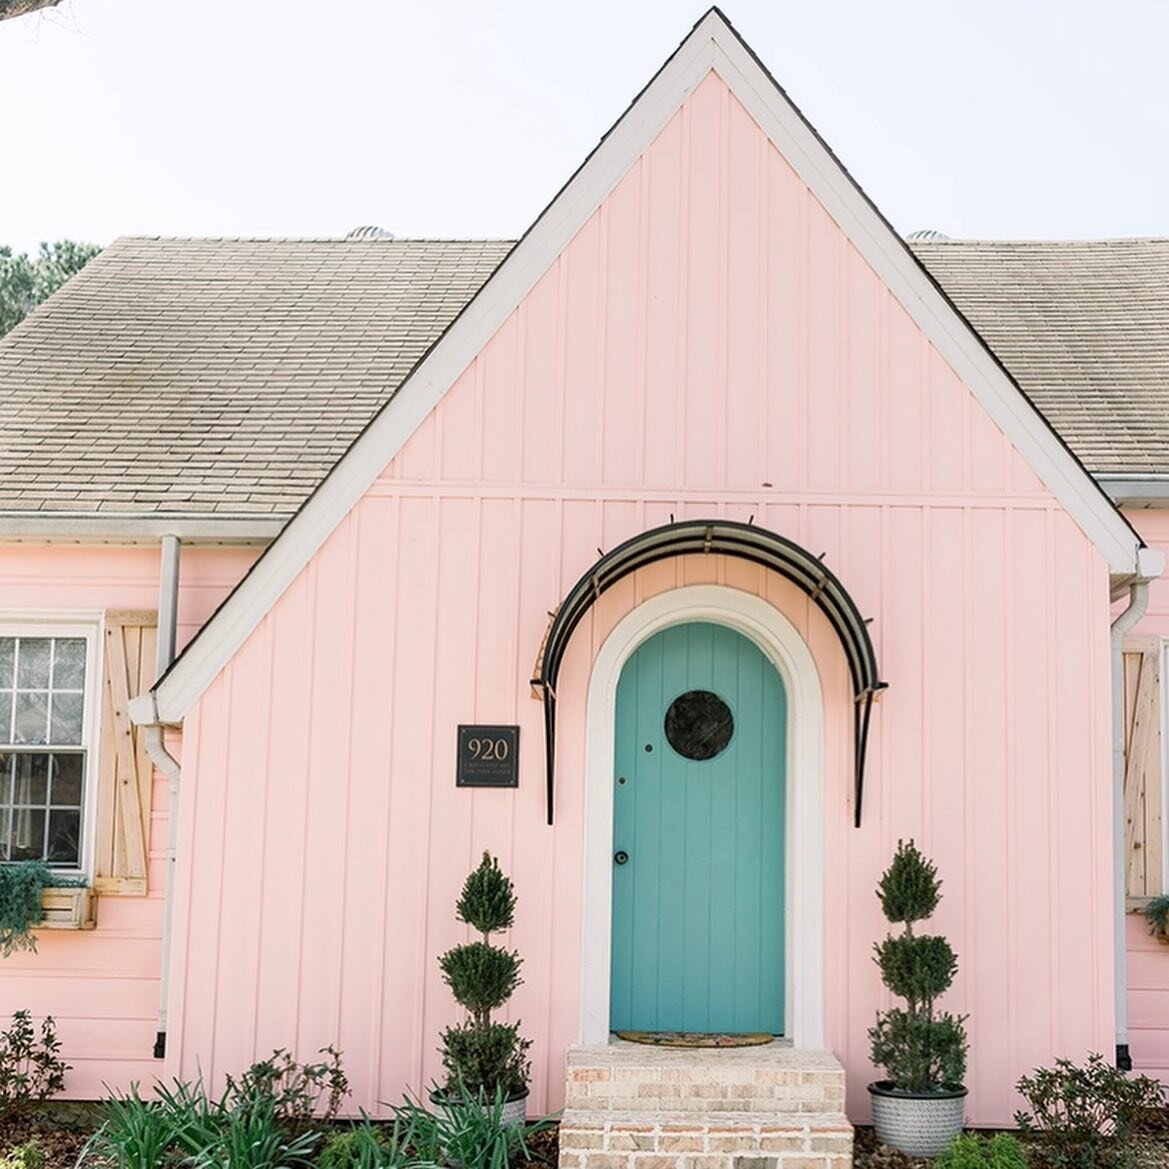 Easter party at a pink house?? YES! 

Event Planning + Bounce House: @inflateclarksville
Photos: @lindsayphoto.co
Charcuterie: @charcuterallie
Florals: @cecytheflowergirl
Venue: @thepinkhouseclarksville
Balloons + Styling: @magicalmomentseventcenter
